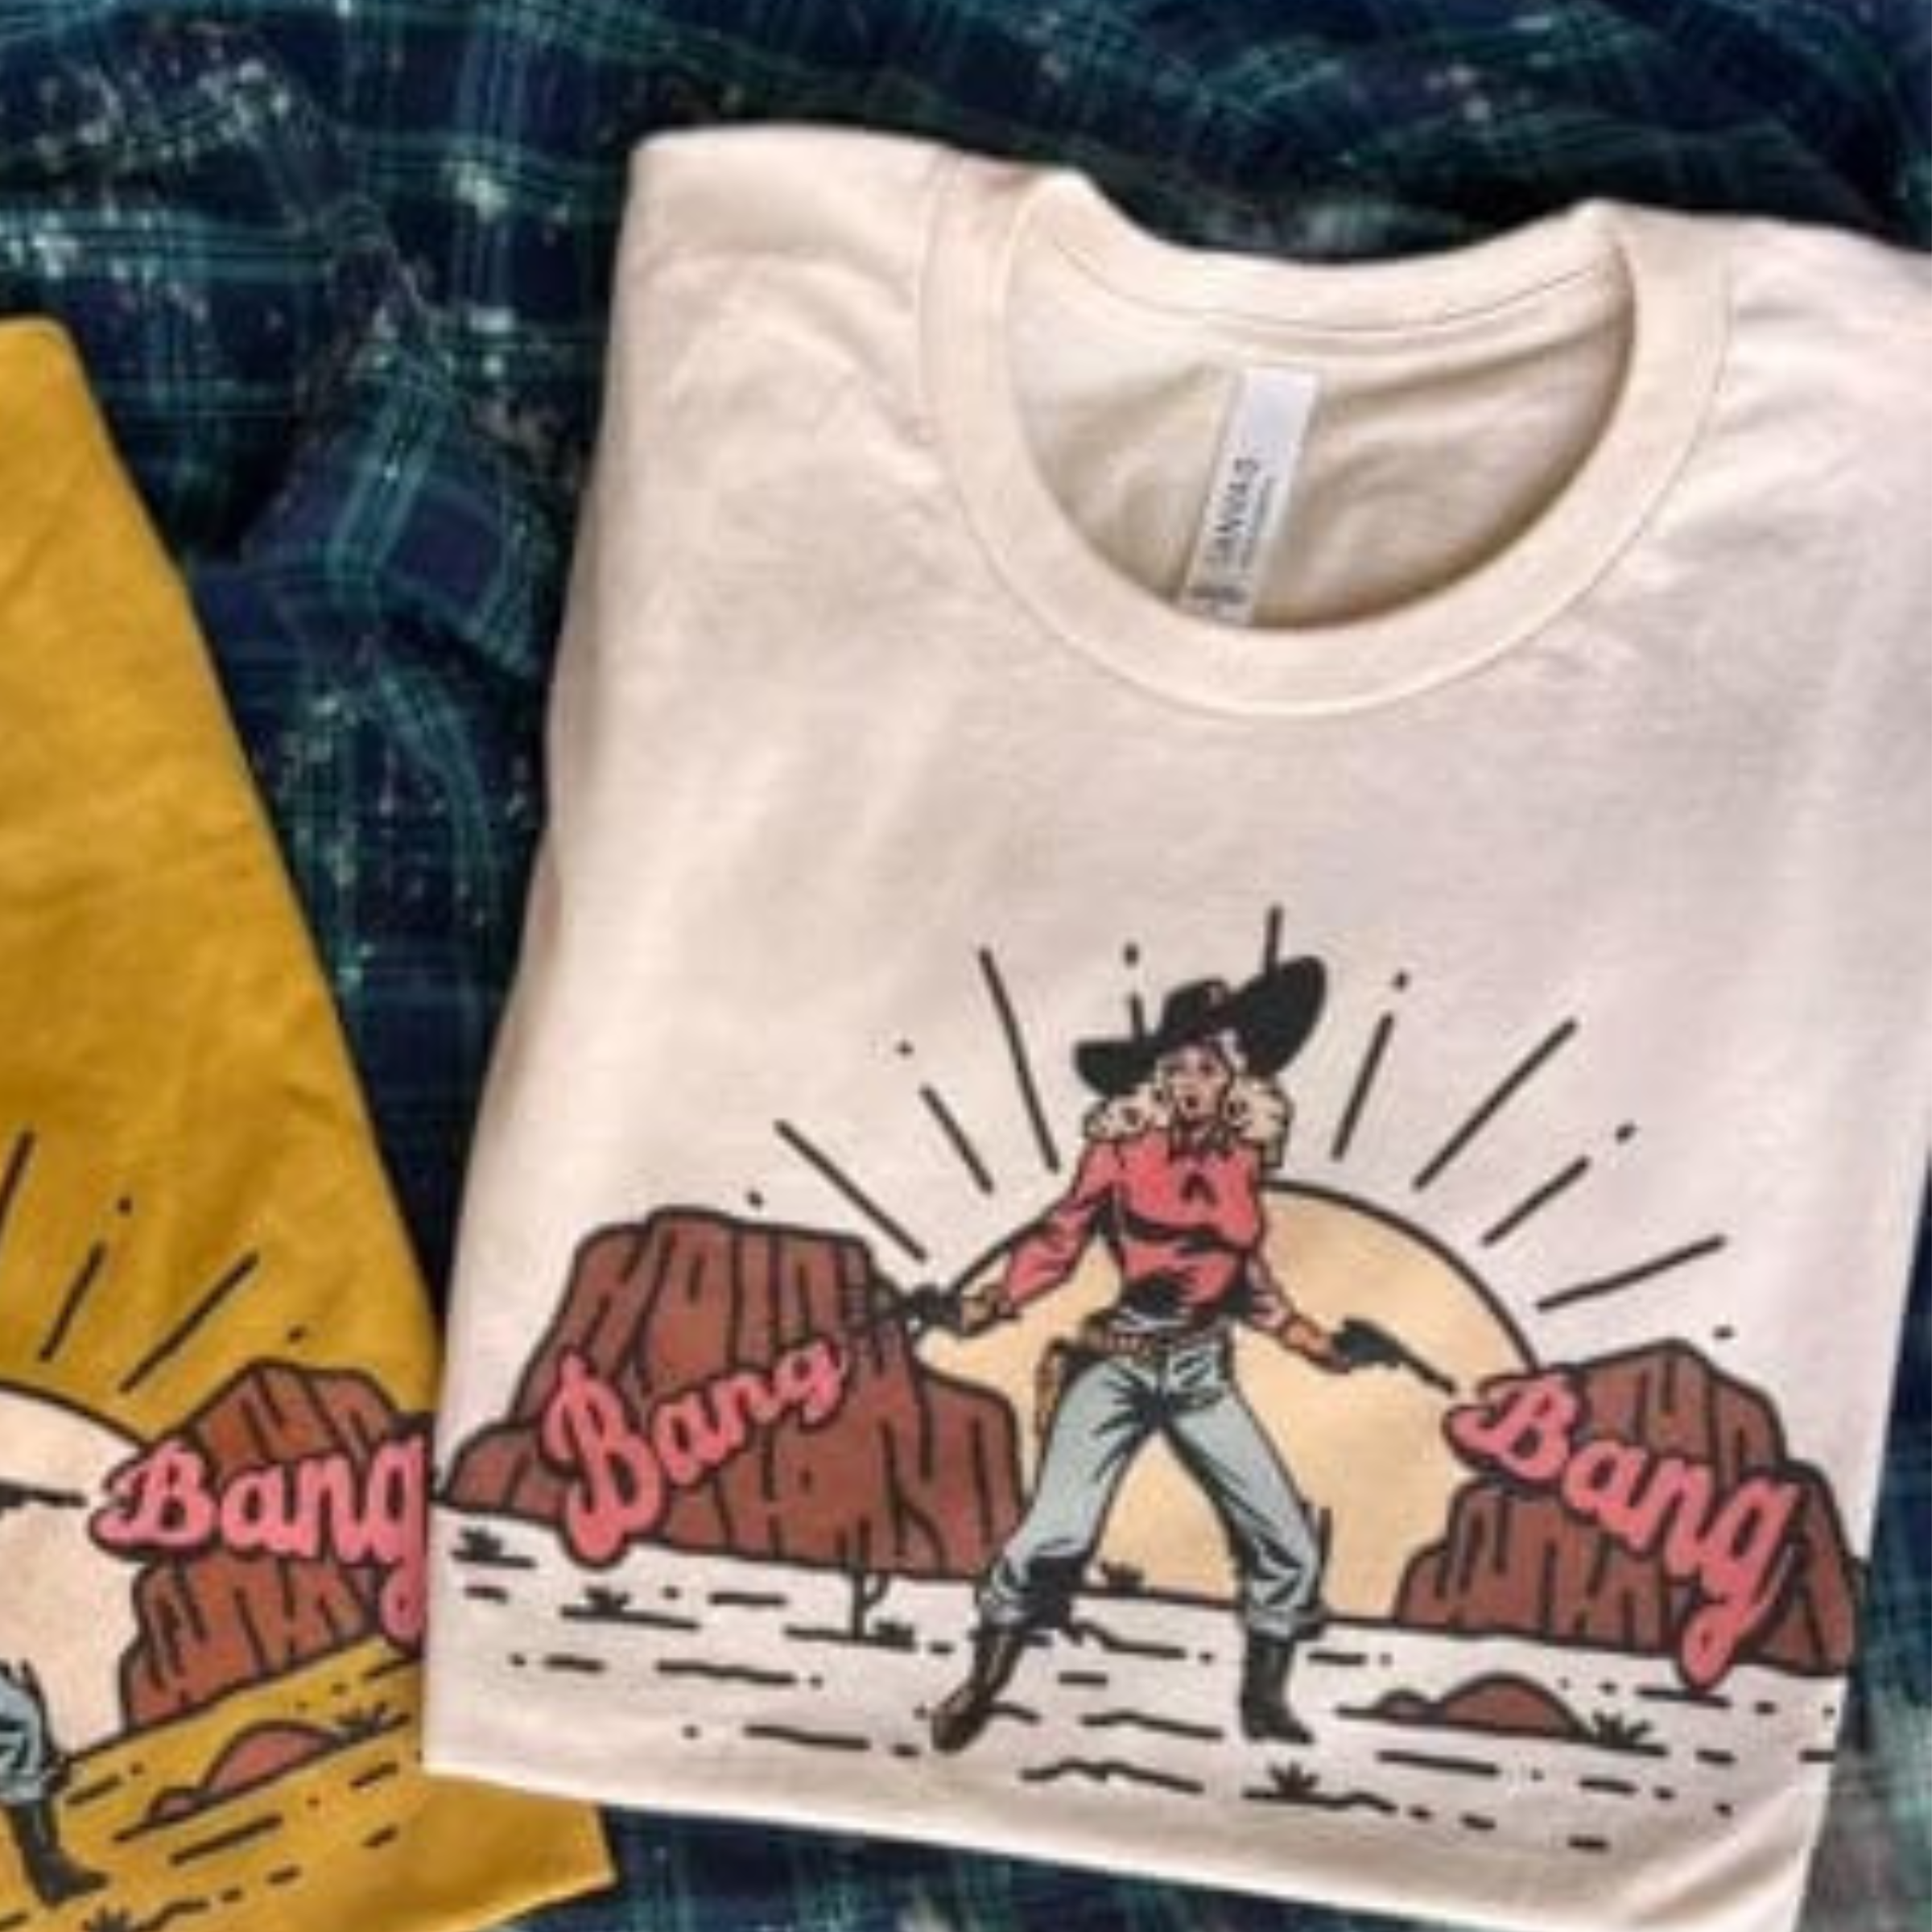 This cream graphic tee includes a crew neckline, short sleeves, and cute hand drawn design of a western scene of a cowgirl in front of mountains and the sun with pistols and the words "Bang Bang" in pink bubble font on either side of her. This tee is shown in this photo as a folded flat lay.